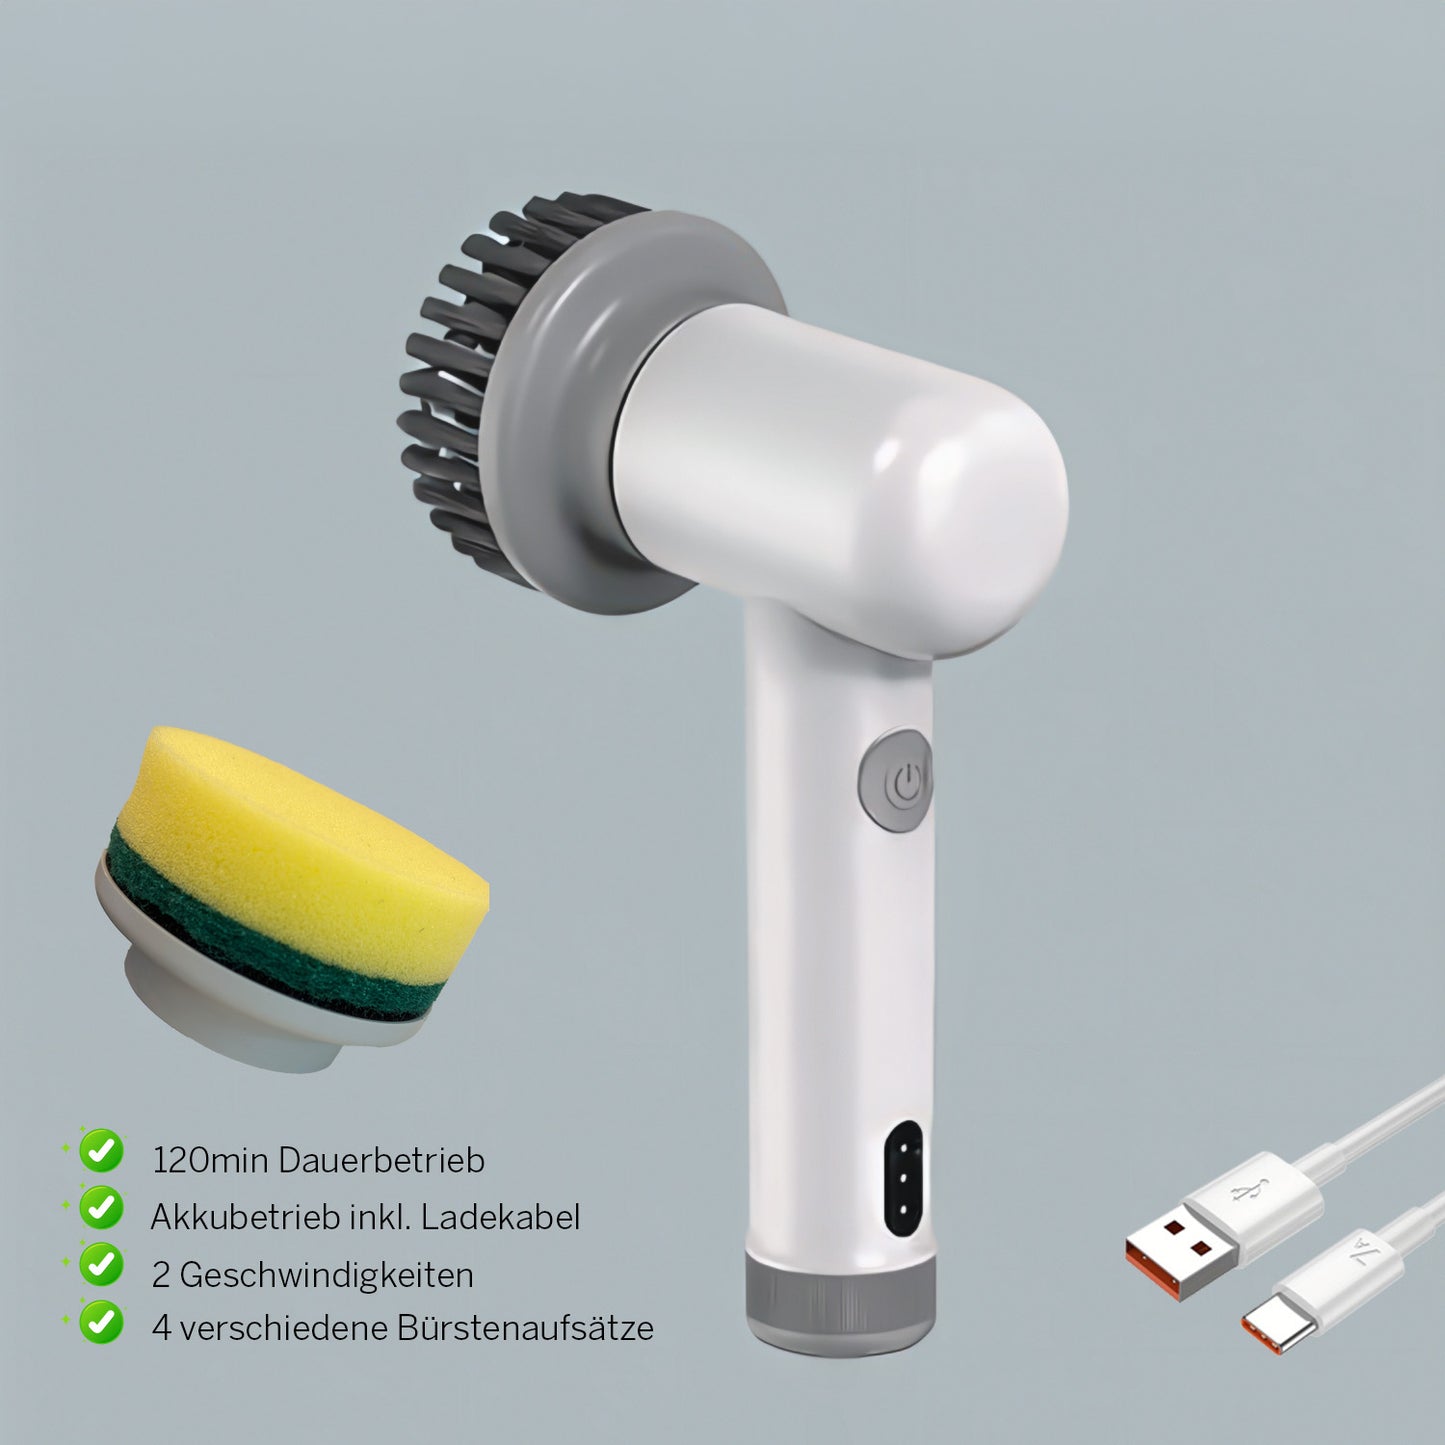 Easy Brush 2.0 ✧ electric cleaning brush ✧ incl. 2 brush attachments (sponge & brush)